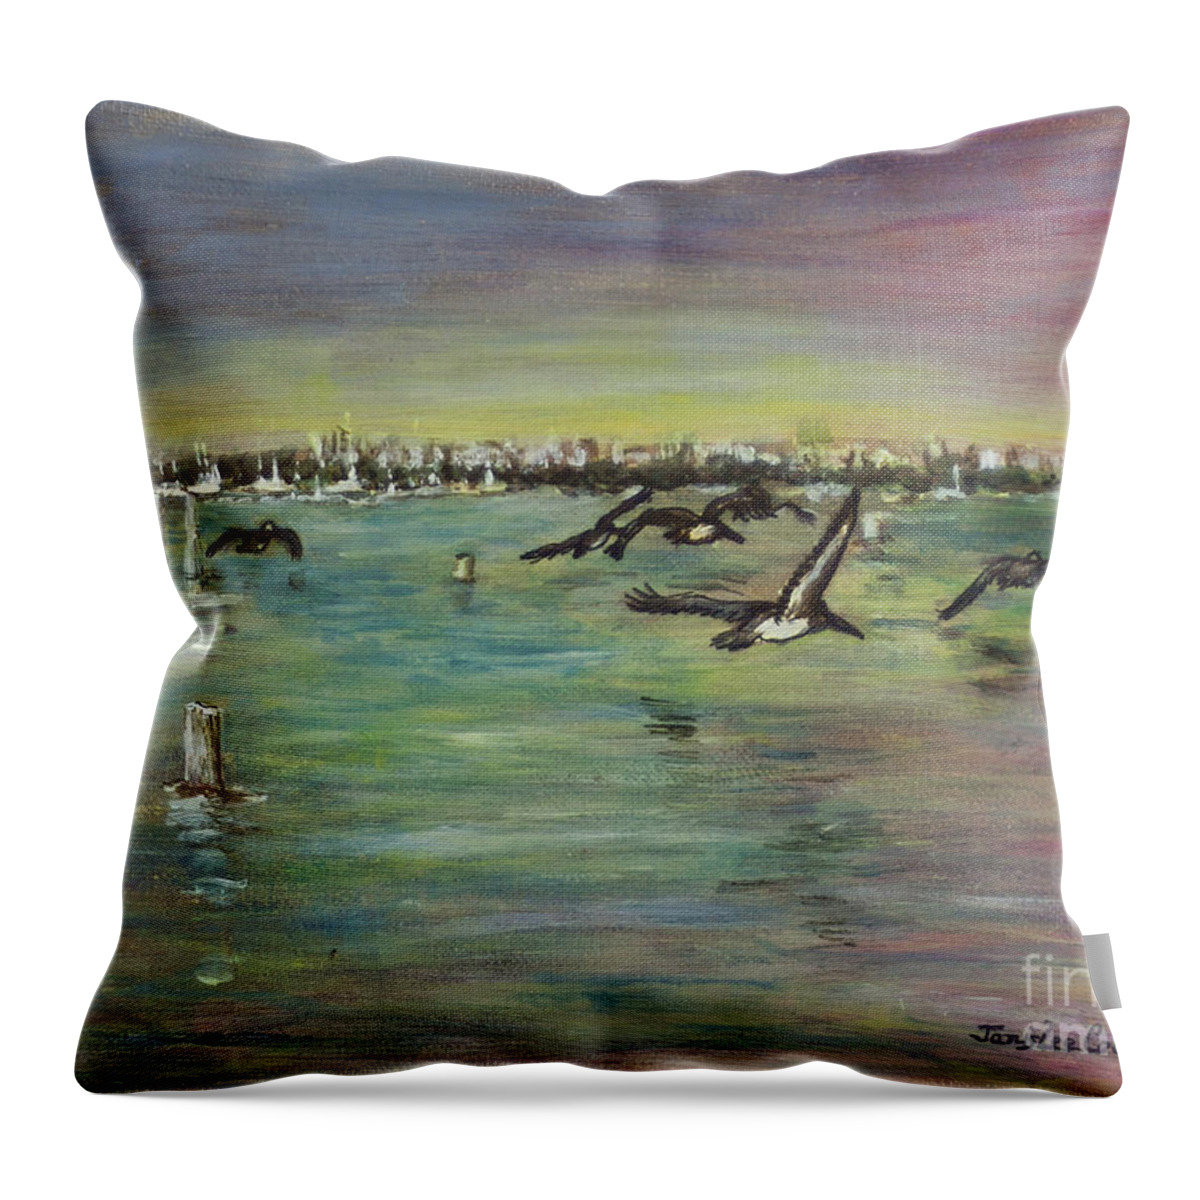 Ocean Throw Pillow featuring the painting Pelicans Fly by Janis Lee Colon